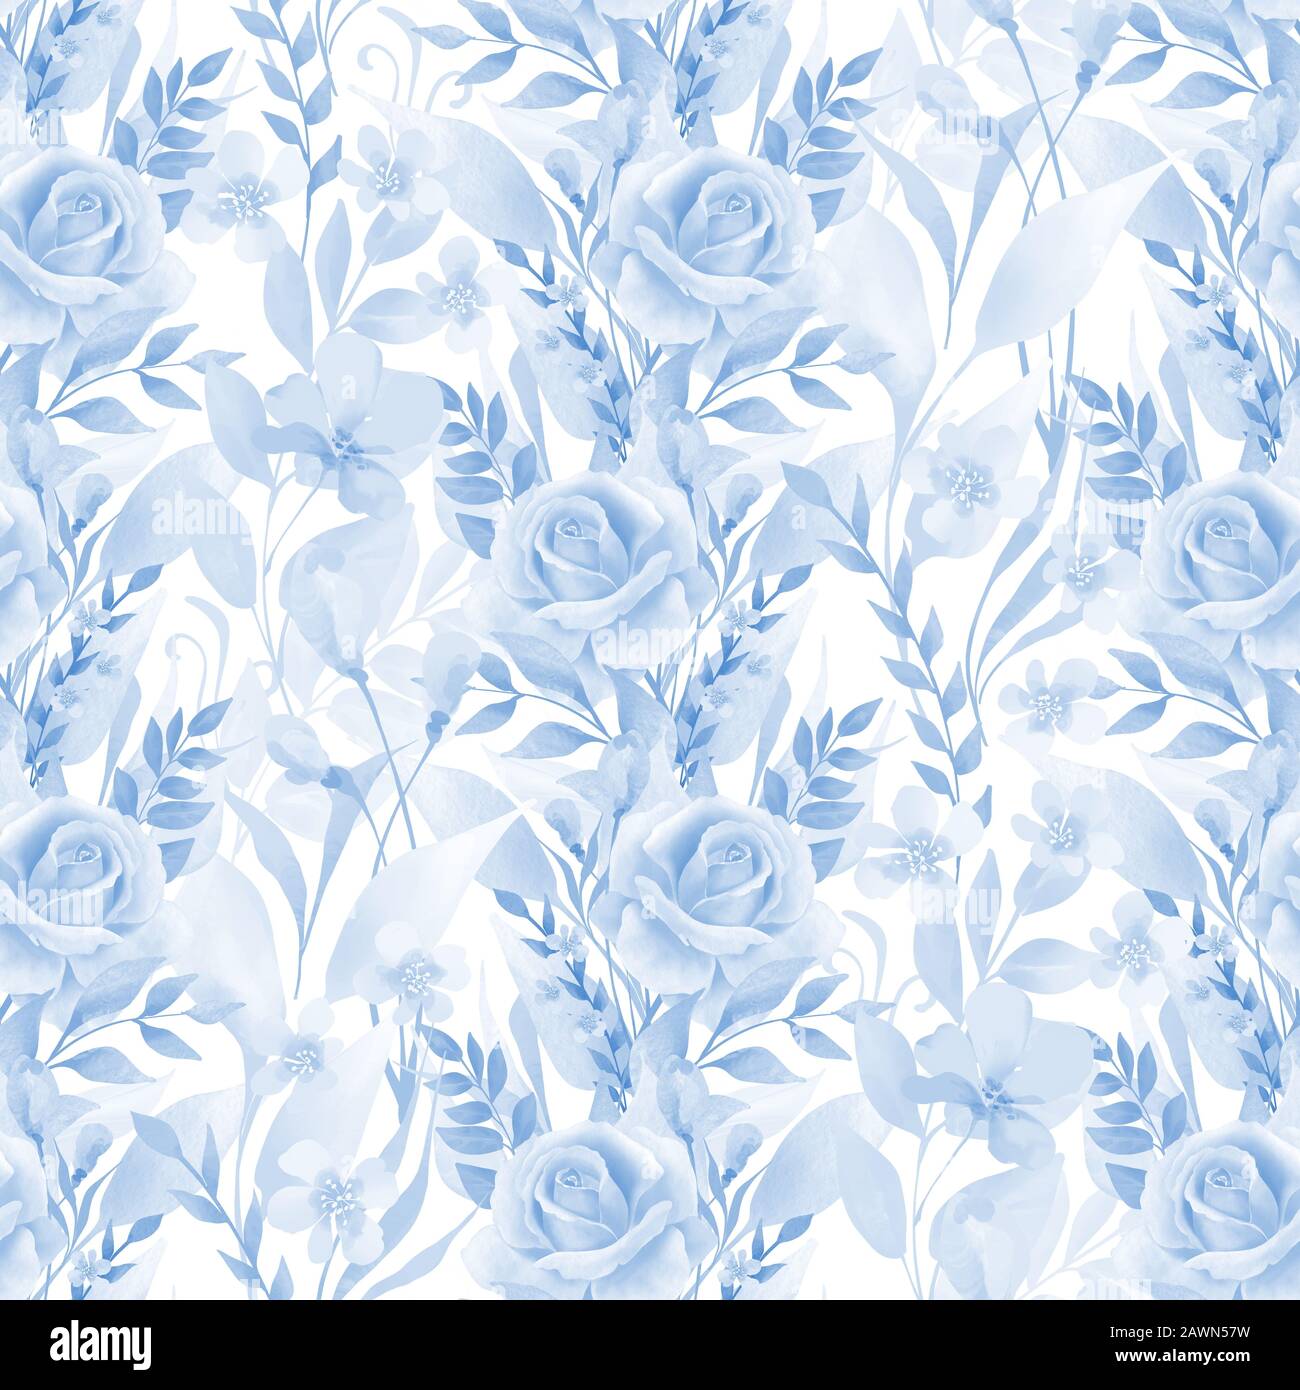 Seamless floral pattern with roses, monochrome watercolor Stock Photo